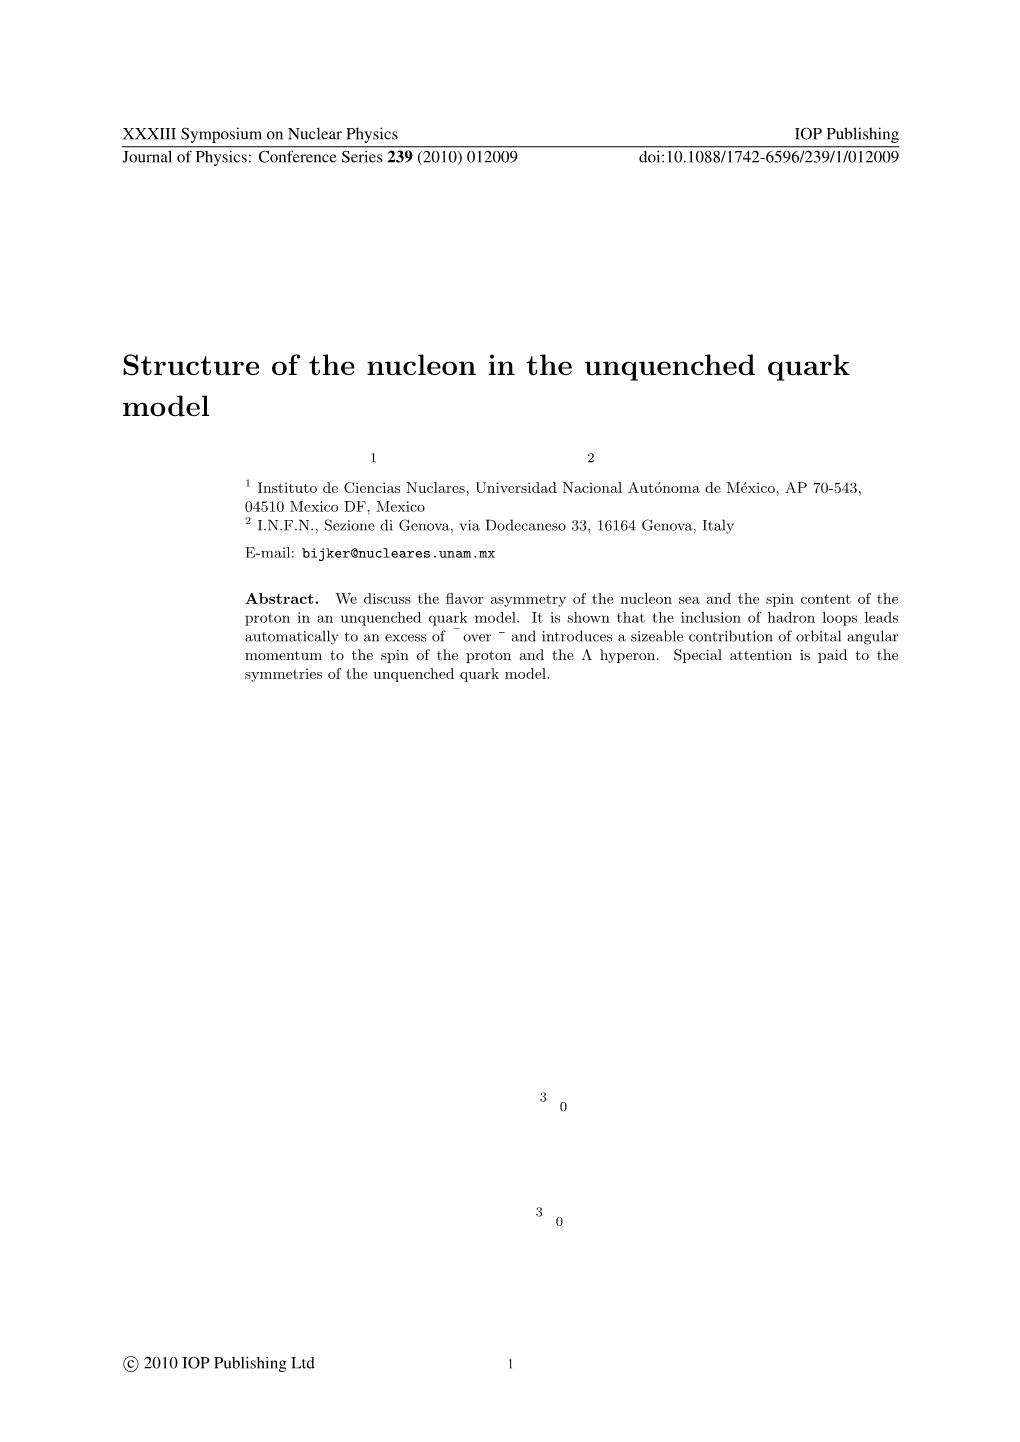 Structure of the Nucleon in the Unquenched Quark Model